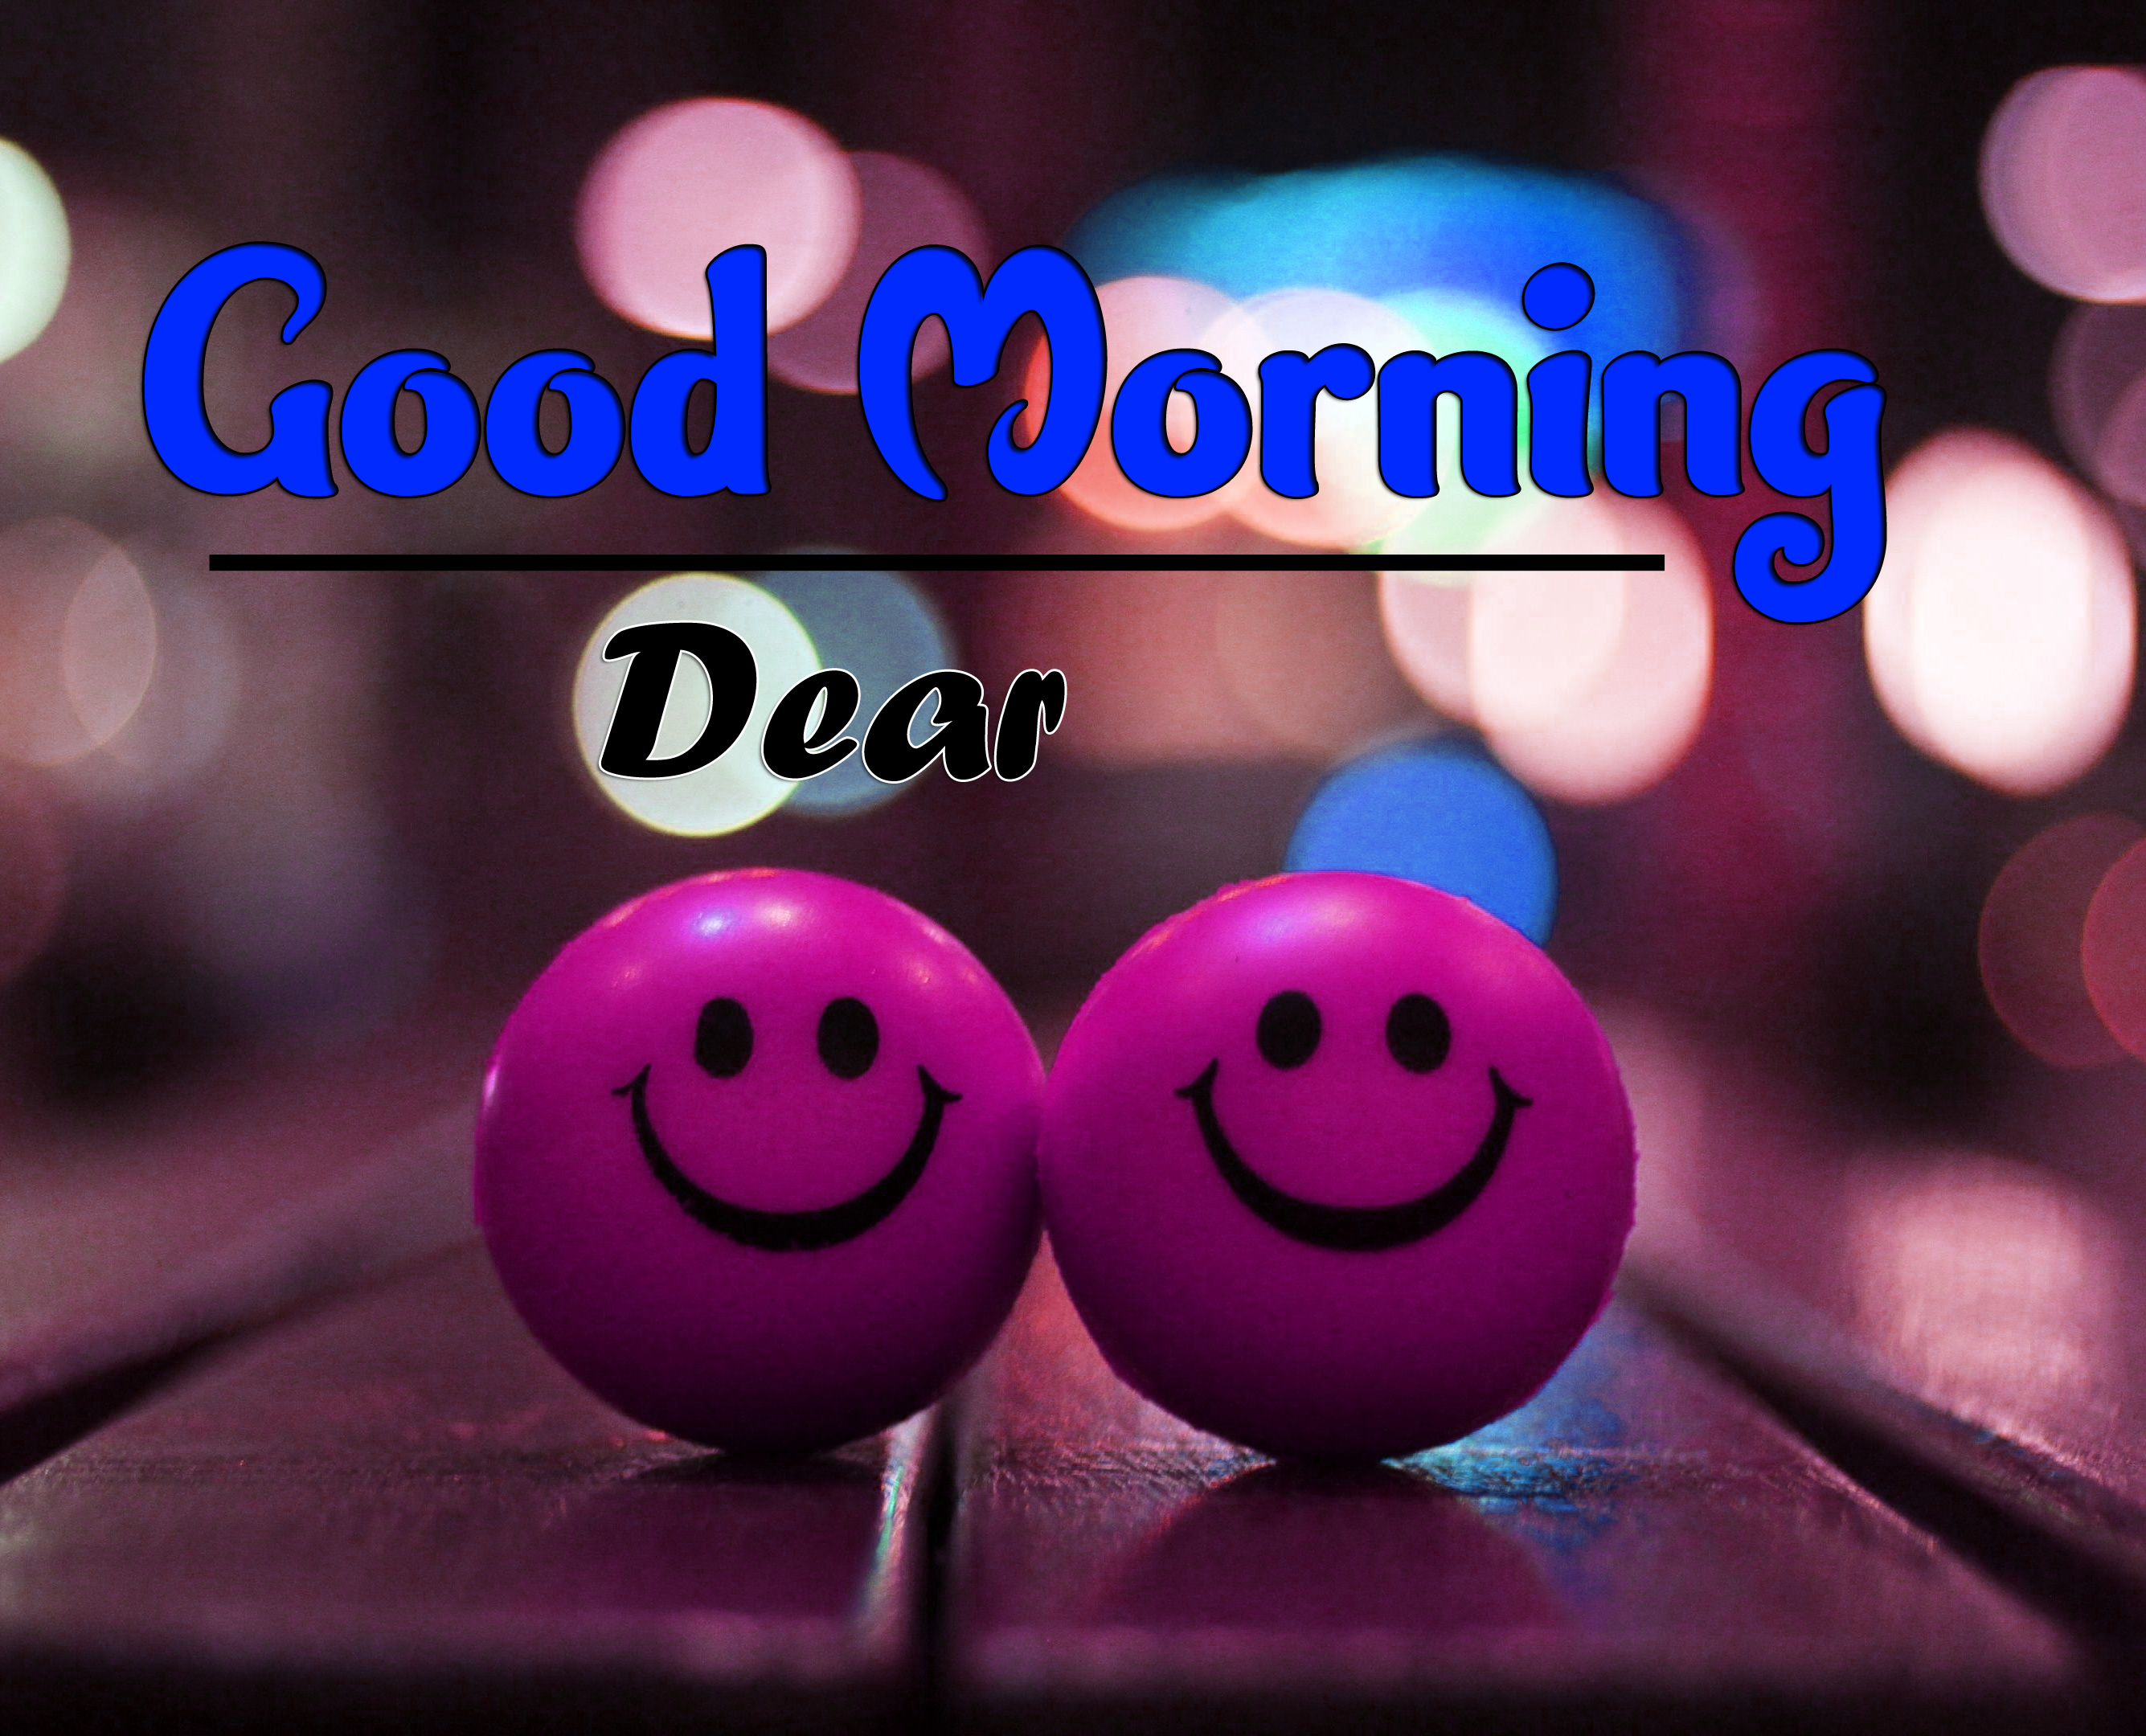 Sunday Good Morning Wishes pics Photo Download 